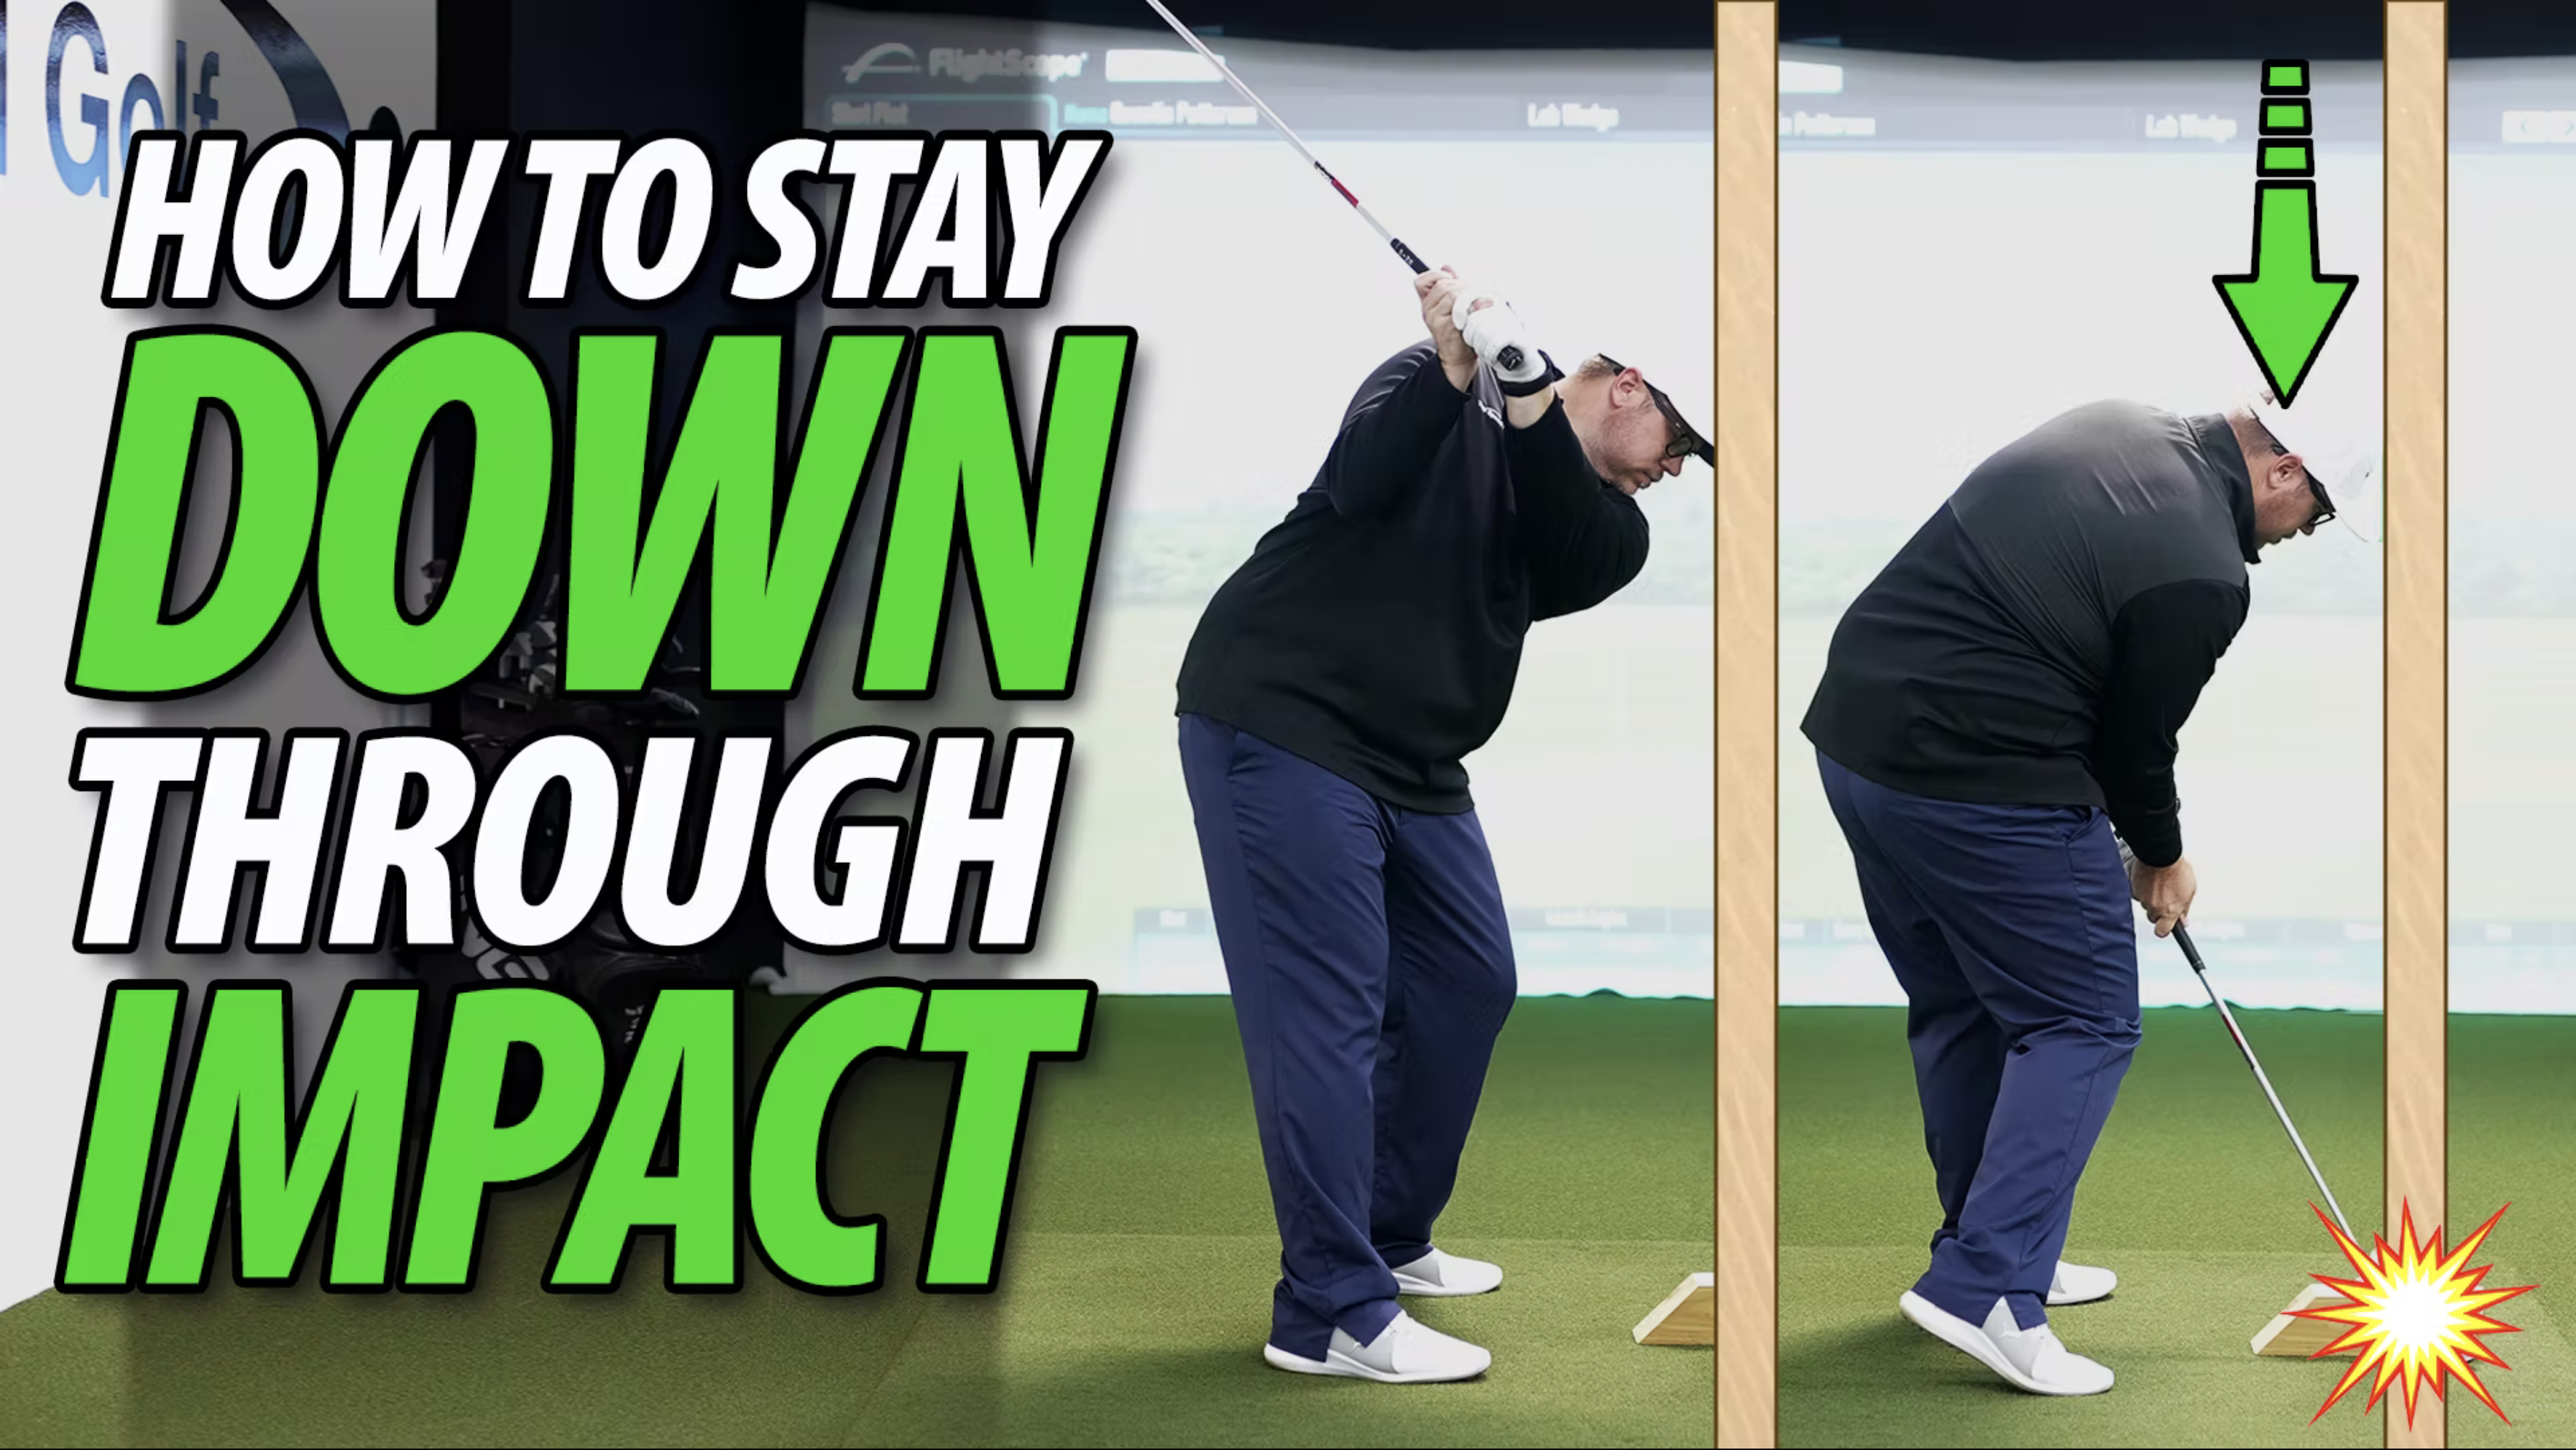 How to Stay Down Through Impact In Golf Swing • Top Speed Golf